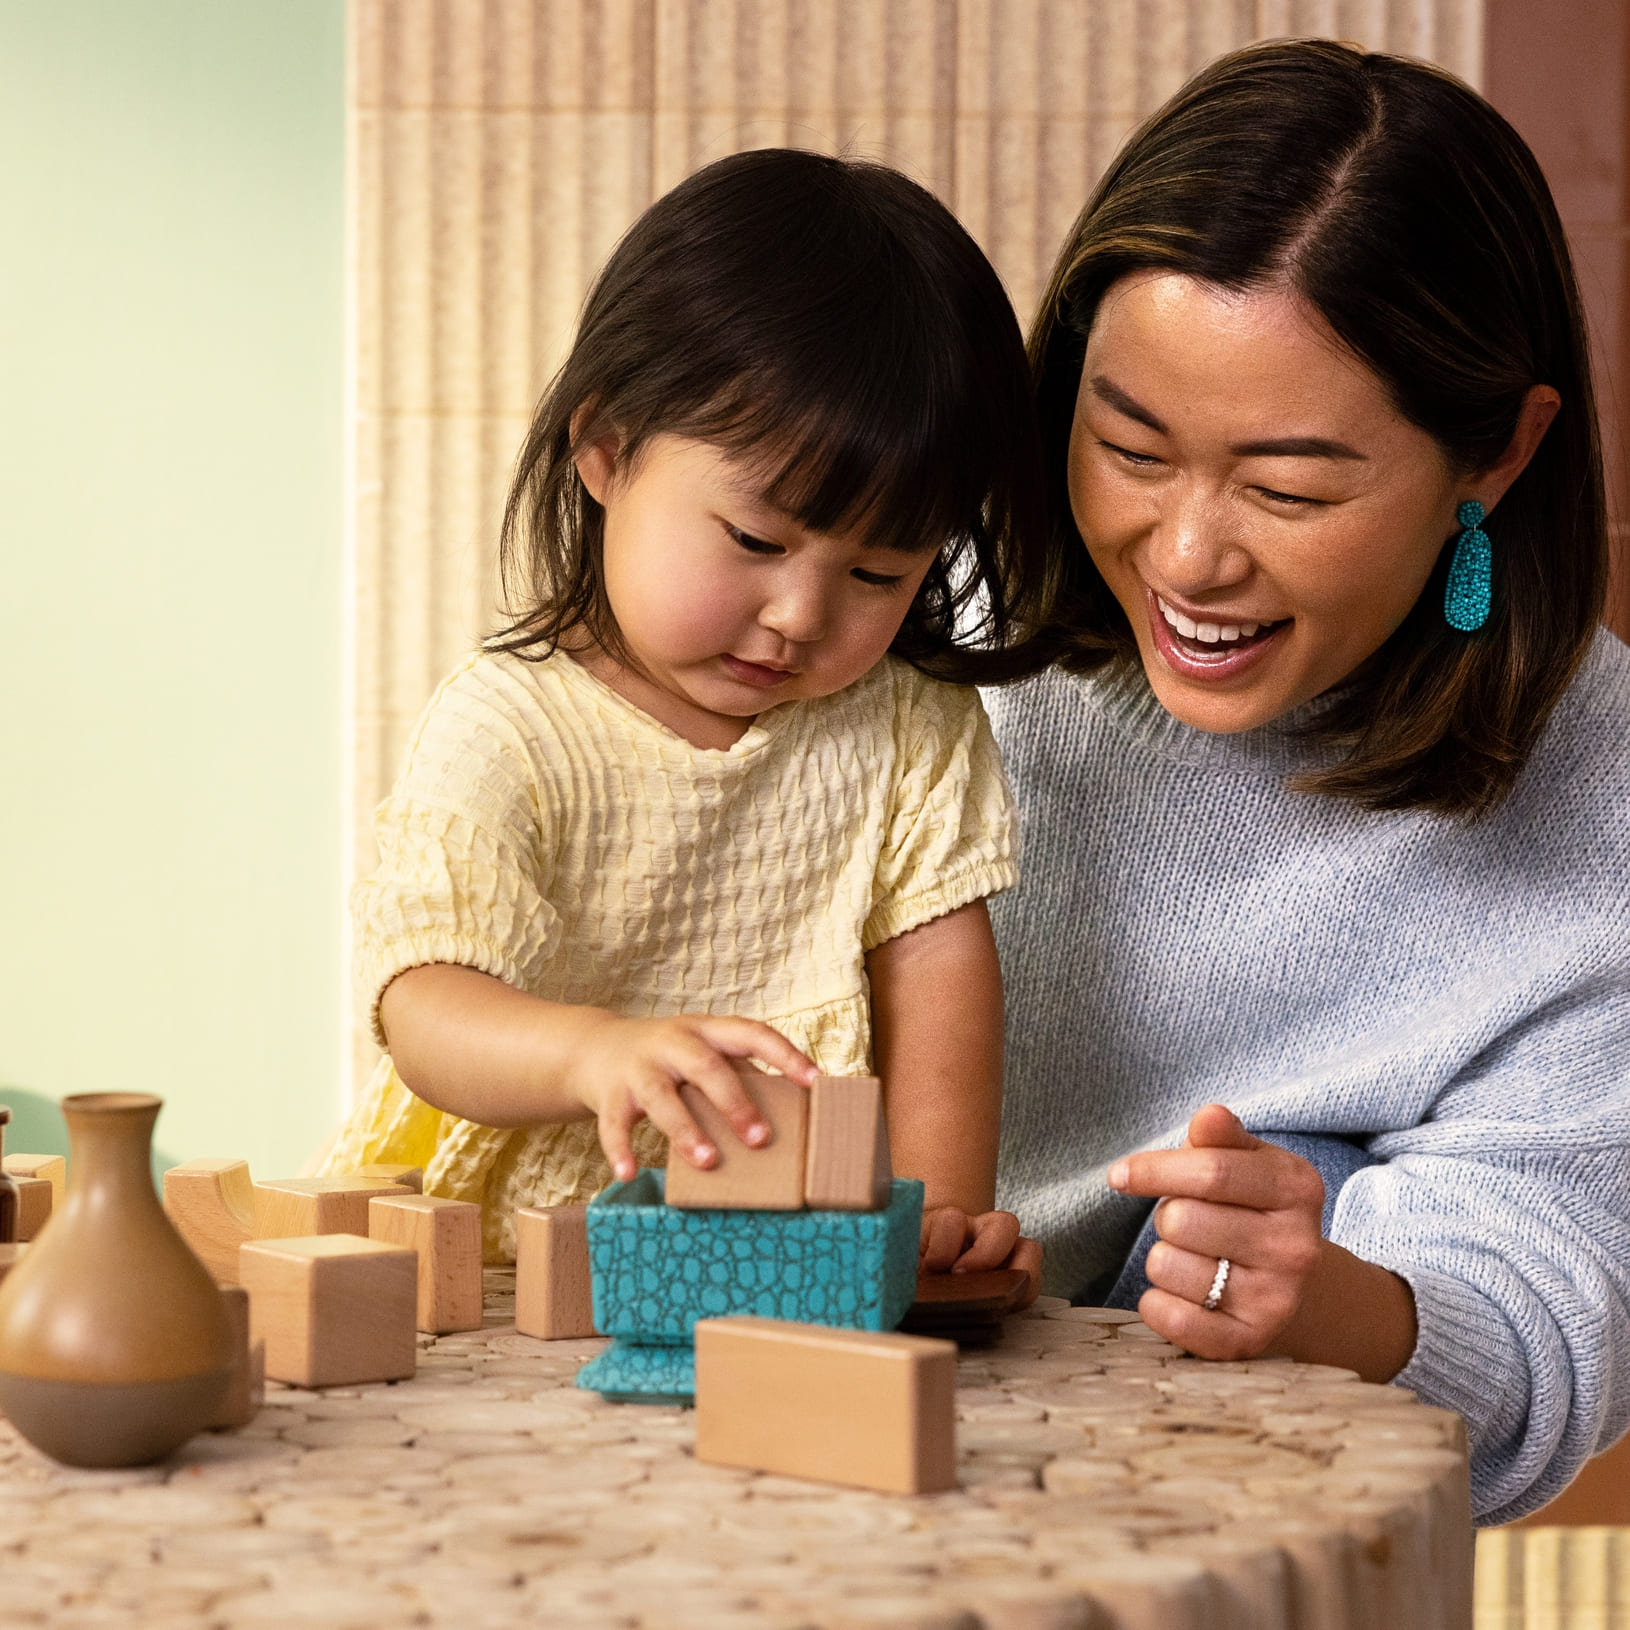 Mom and daughter play with building blocks